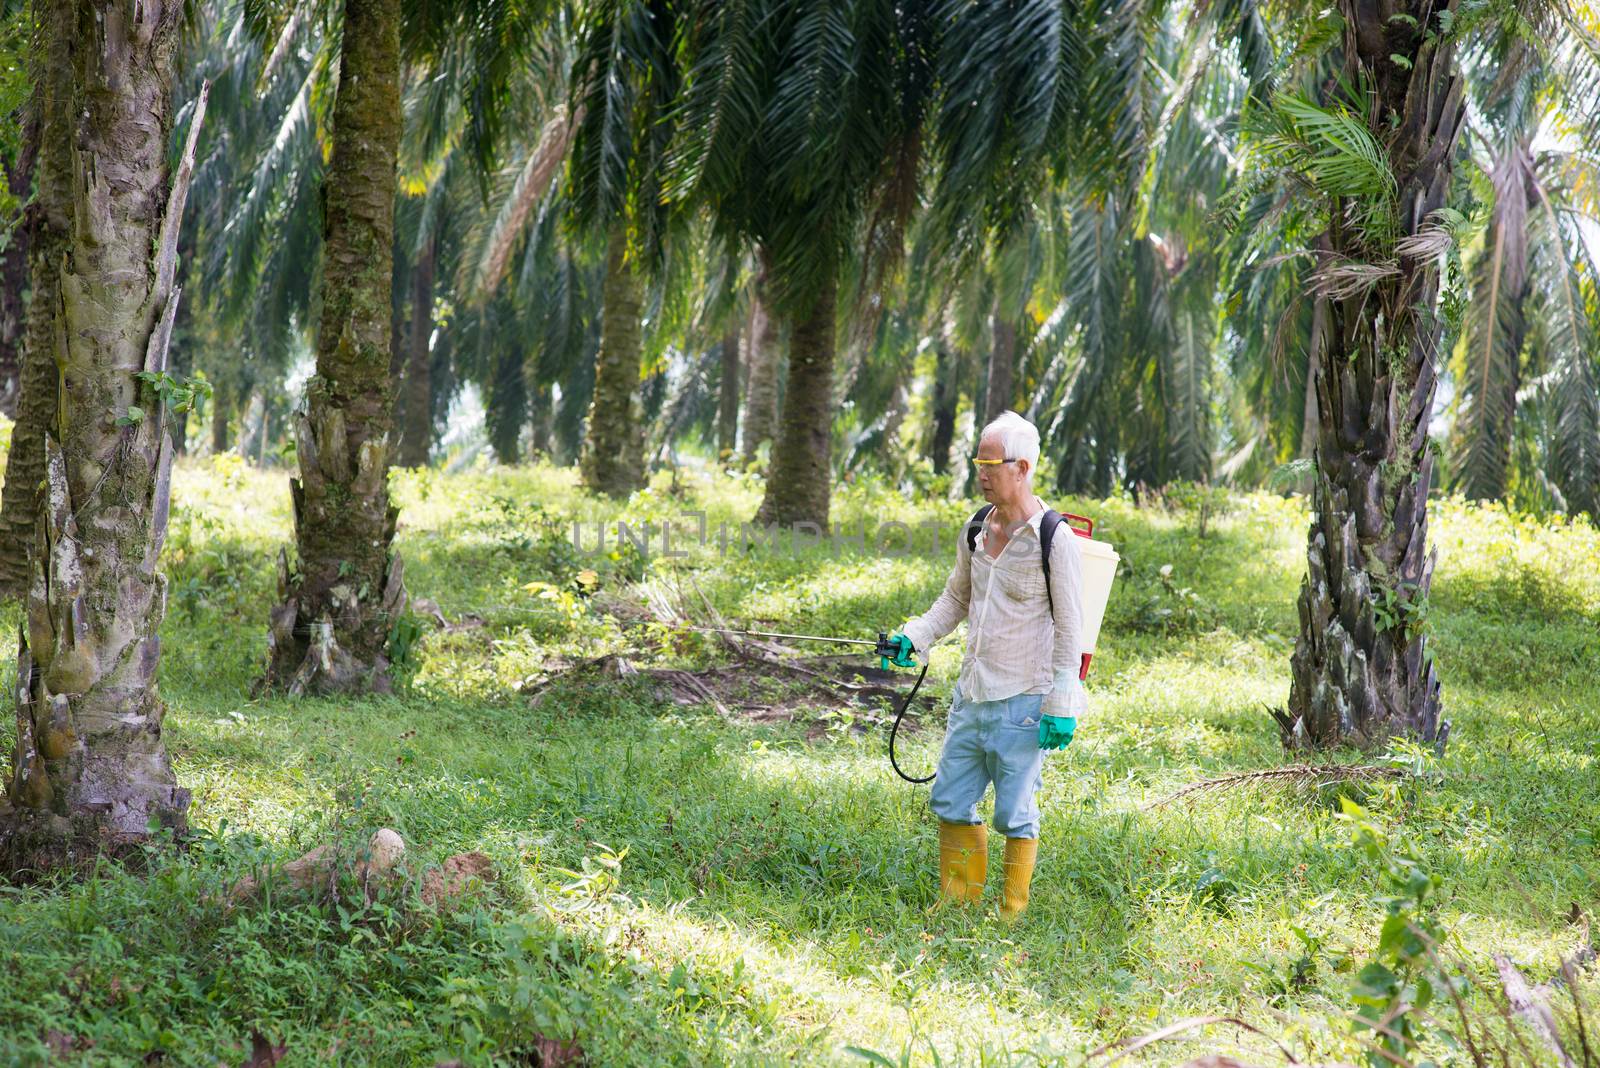 spraying herbicides at oil palm estate by szefei